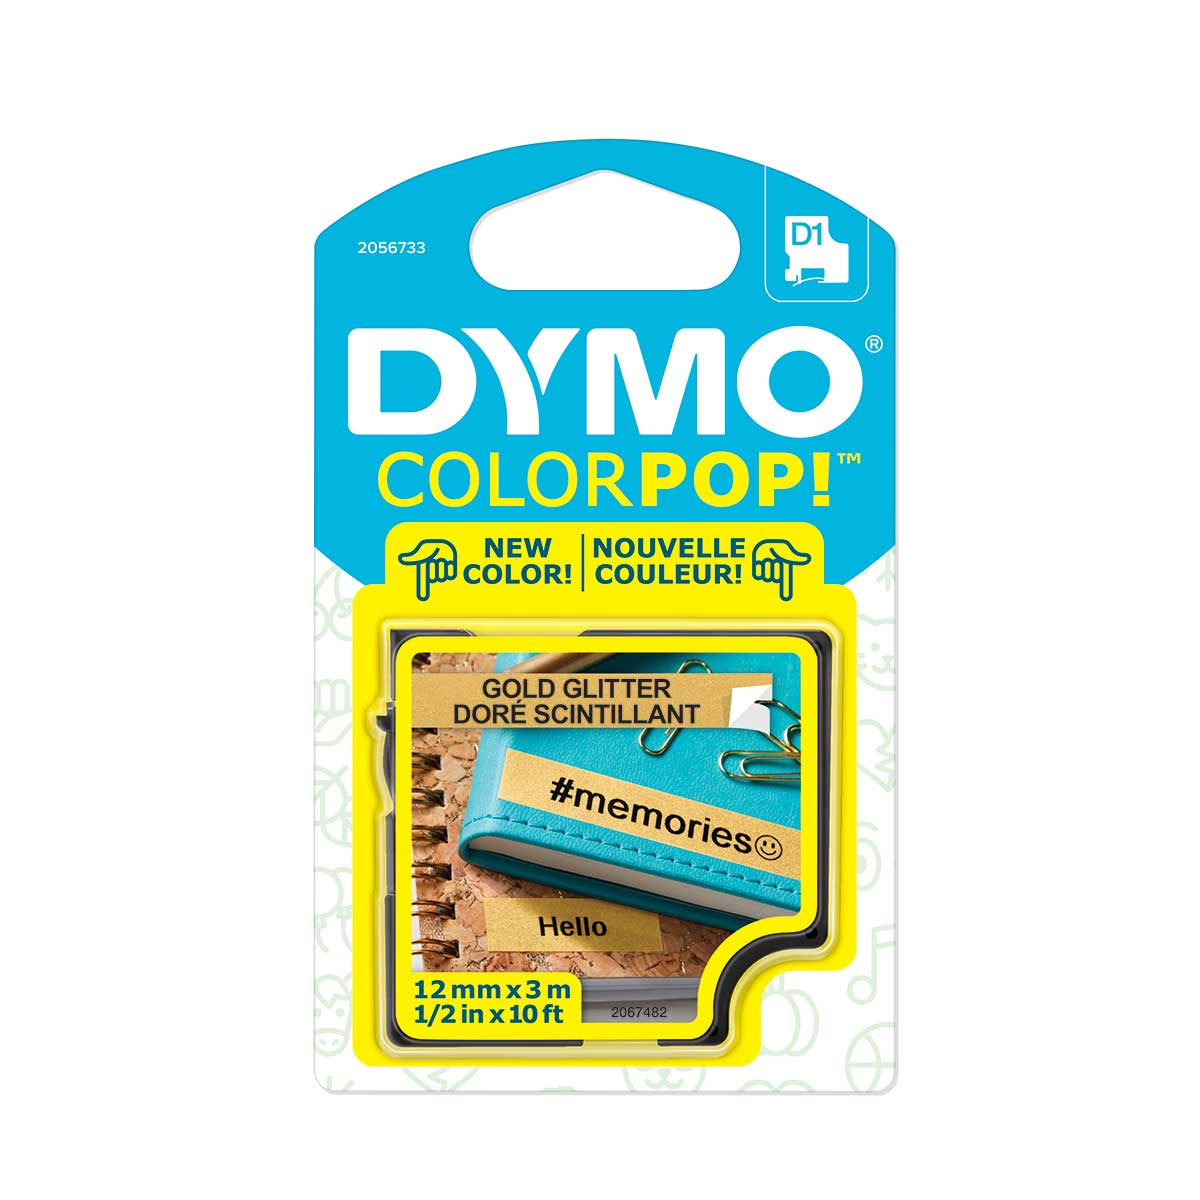 Dymo Colorpop Label Tape, 2 Pack, Silver and Gold  Dymo Dymo Labels